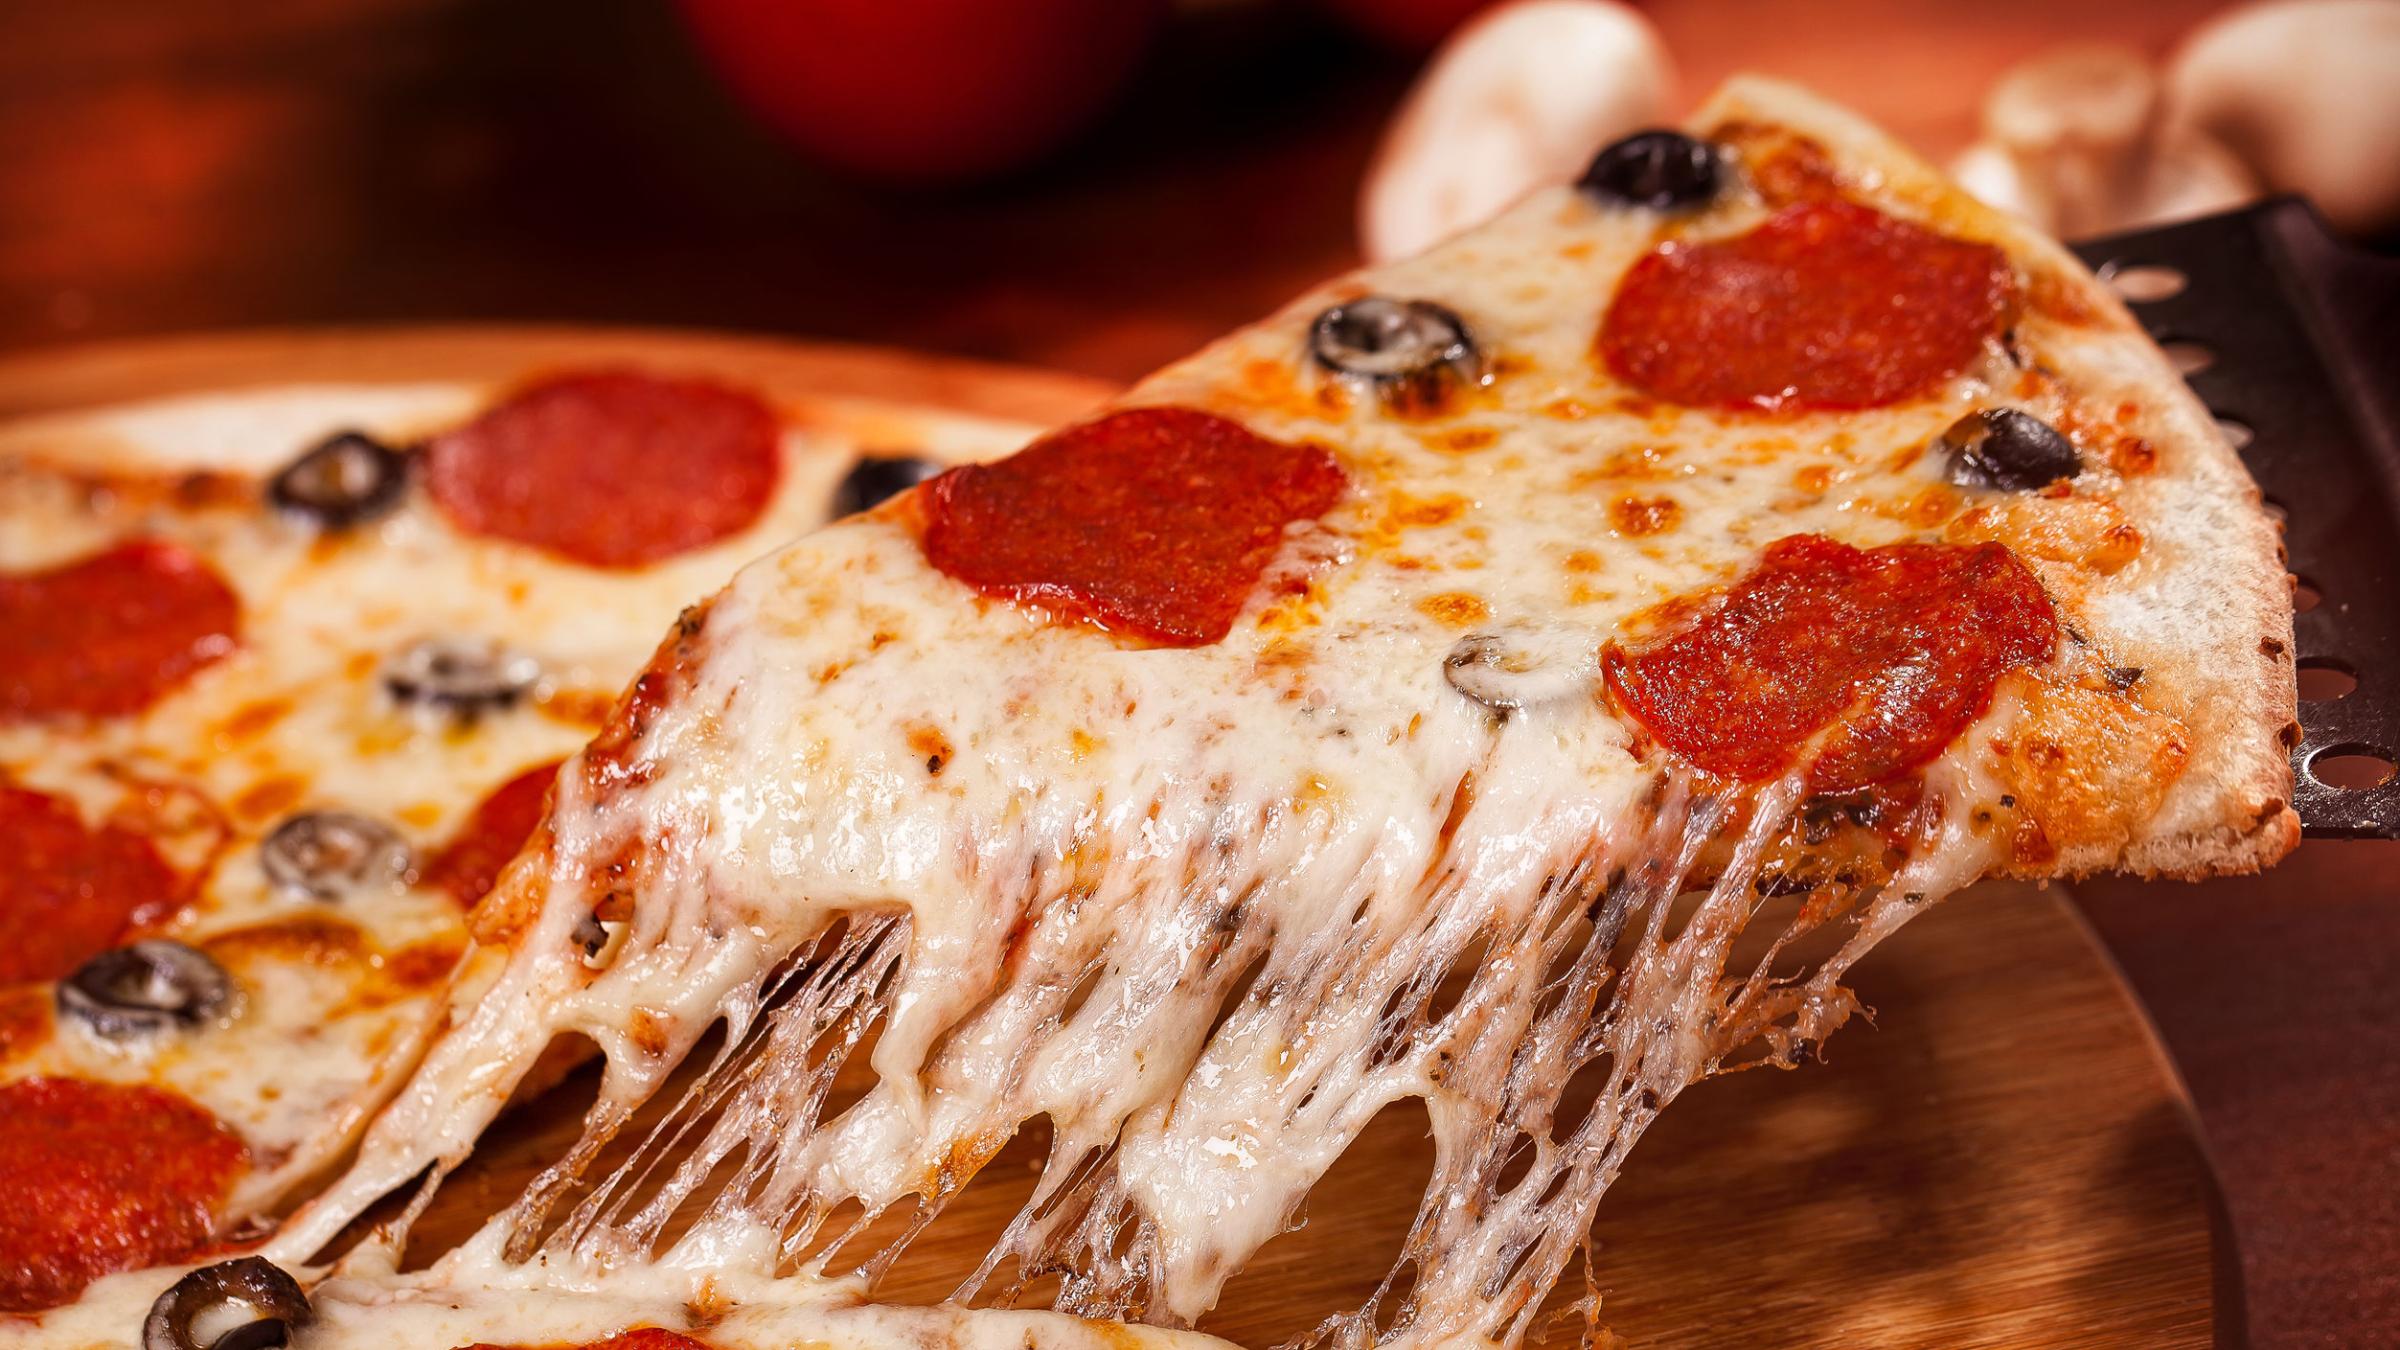 The Results Are IN&hellip; Find Out What Was Voted As The Worst Pizza